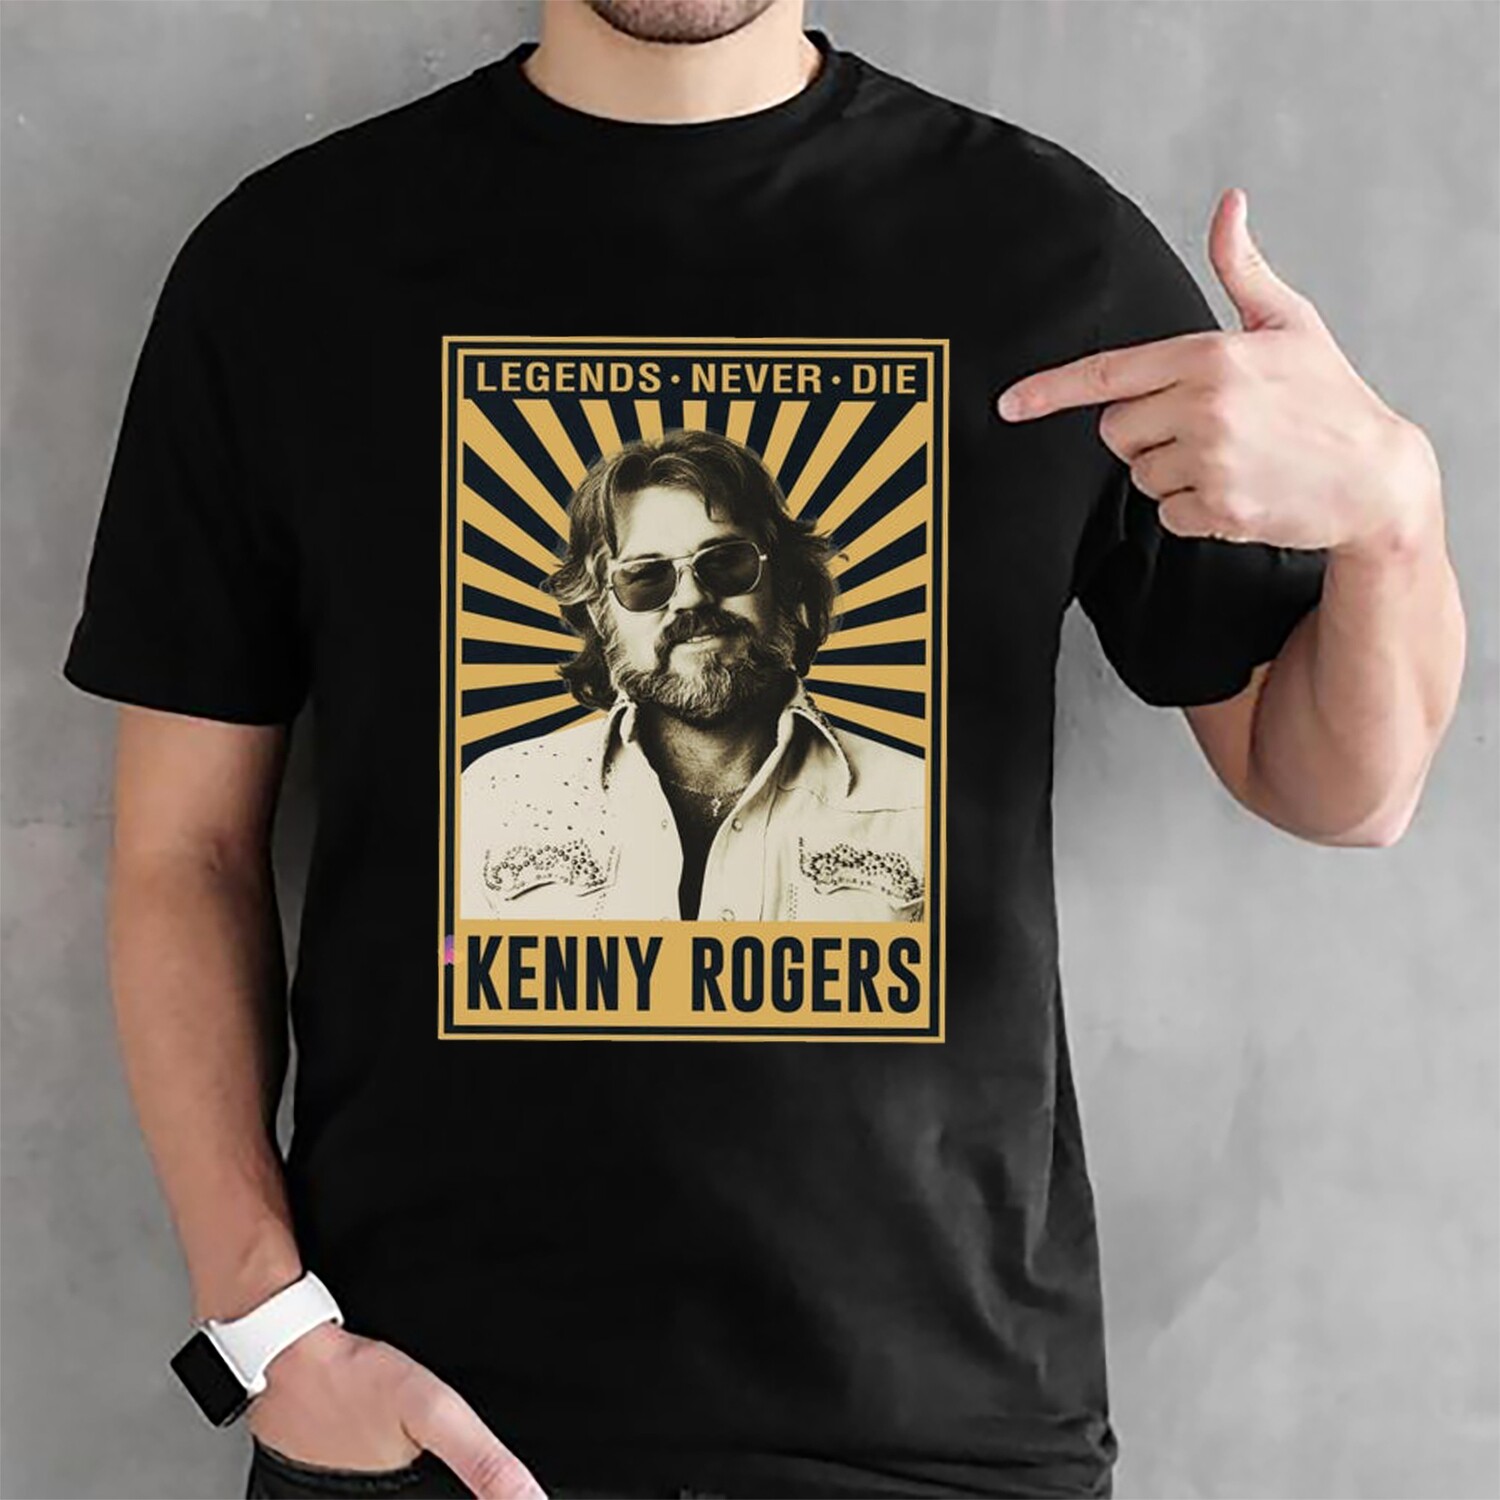 R.I.P Kenny Rogers Shirt Legends Never Die T-shirt RIP Kenny Rogers Country Music Lover Tee Gift For Men Women